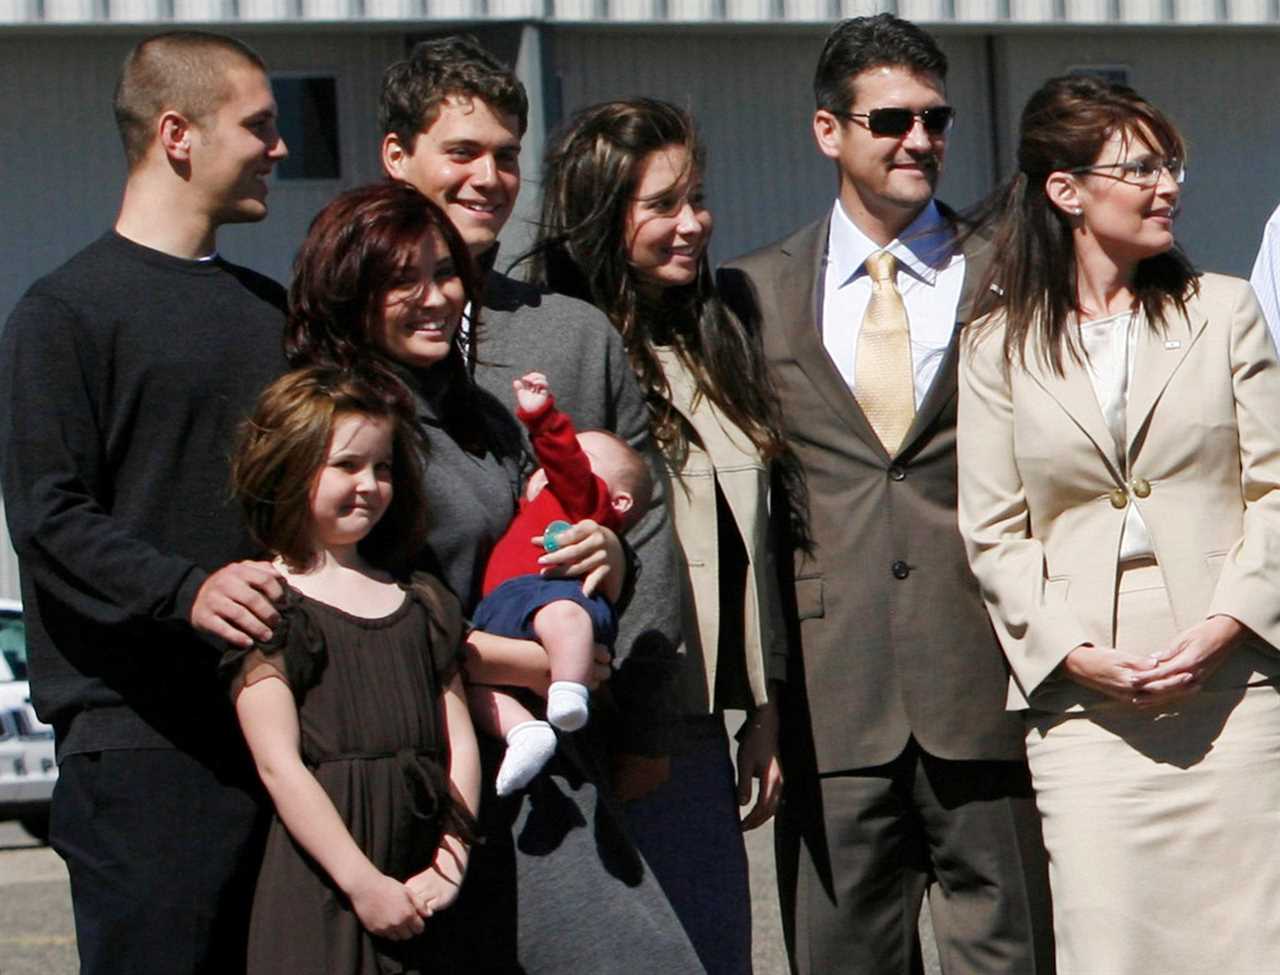 On the campaign trail in 2008. From left to right, son Track, daughter Piper, daughter Willow holding infant son Trig, Levi Johnston, boyfriend of daughter Bristol, and Palin's husband Todd.